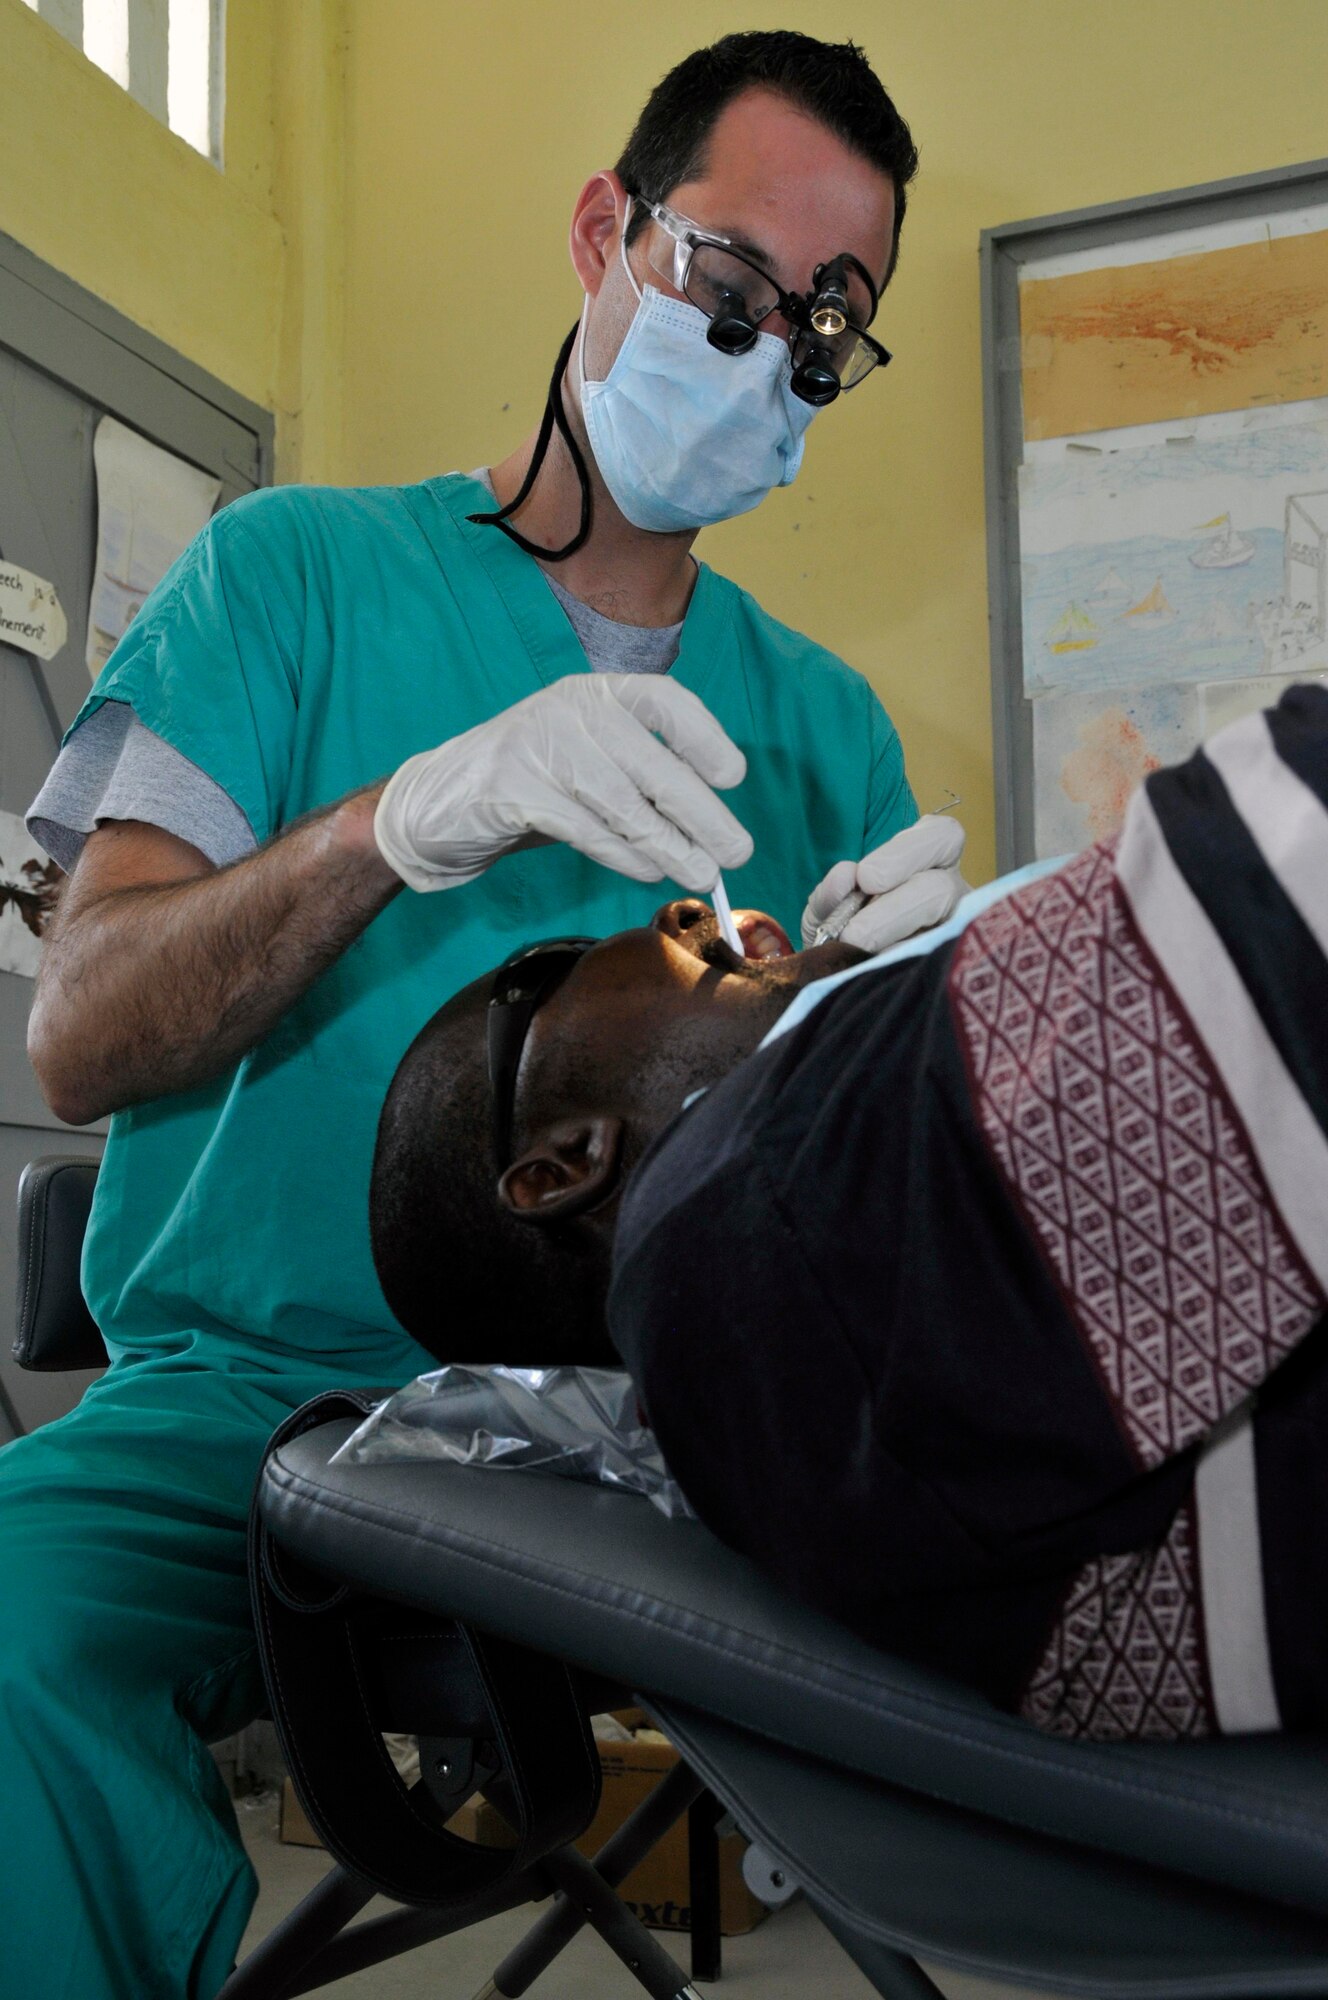 Capt. Theadore Jackson, Dentist from the 375th Dental Squadron, Scott AFB, Illinois, gives a Guyanese man a filling at the Diamond School Aug 10, 2009, in Diamond, Guyana. Providing free dental care is just one part of the New Horizons Guyana humanitarian mission. More than 650 service members are providing assistance during this mission by building medical clinics and schools and providing free medical, dental and optometry care.(U.S. Air Force photo by Airman 1st Class Perry Aston) (Released)